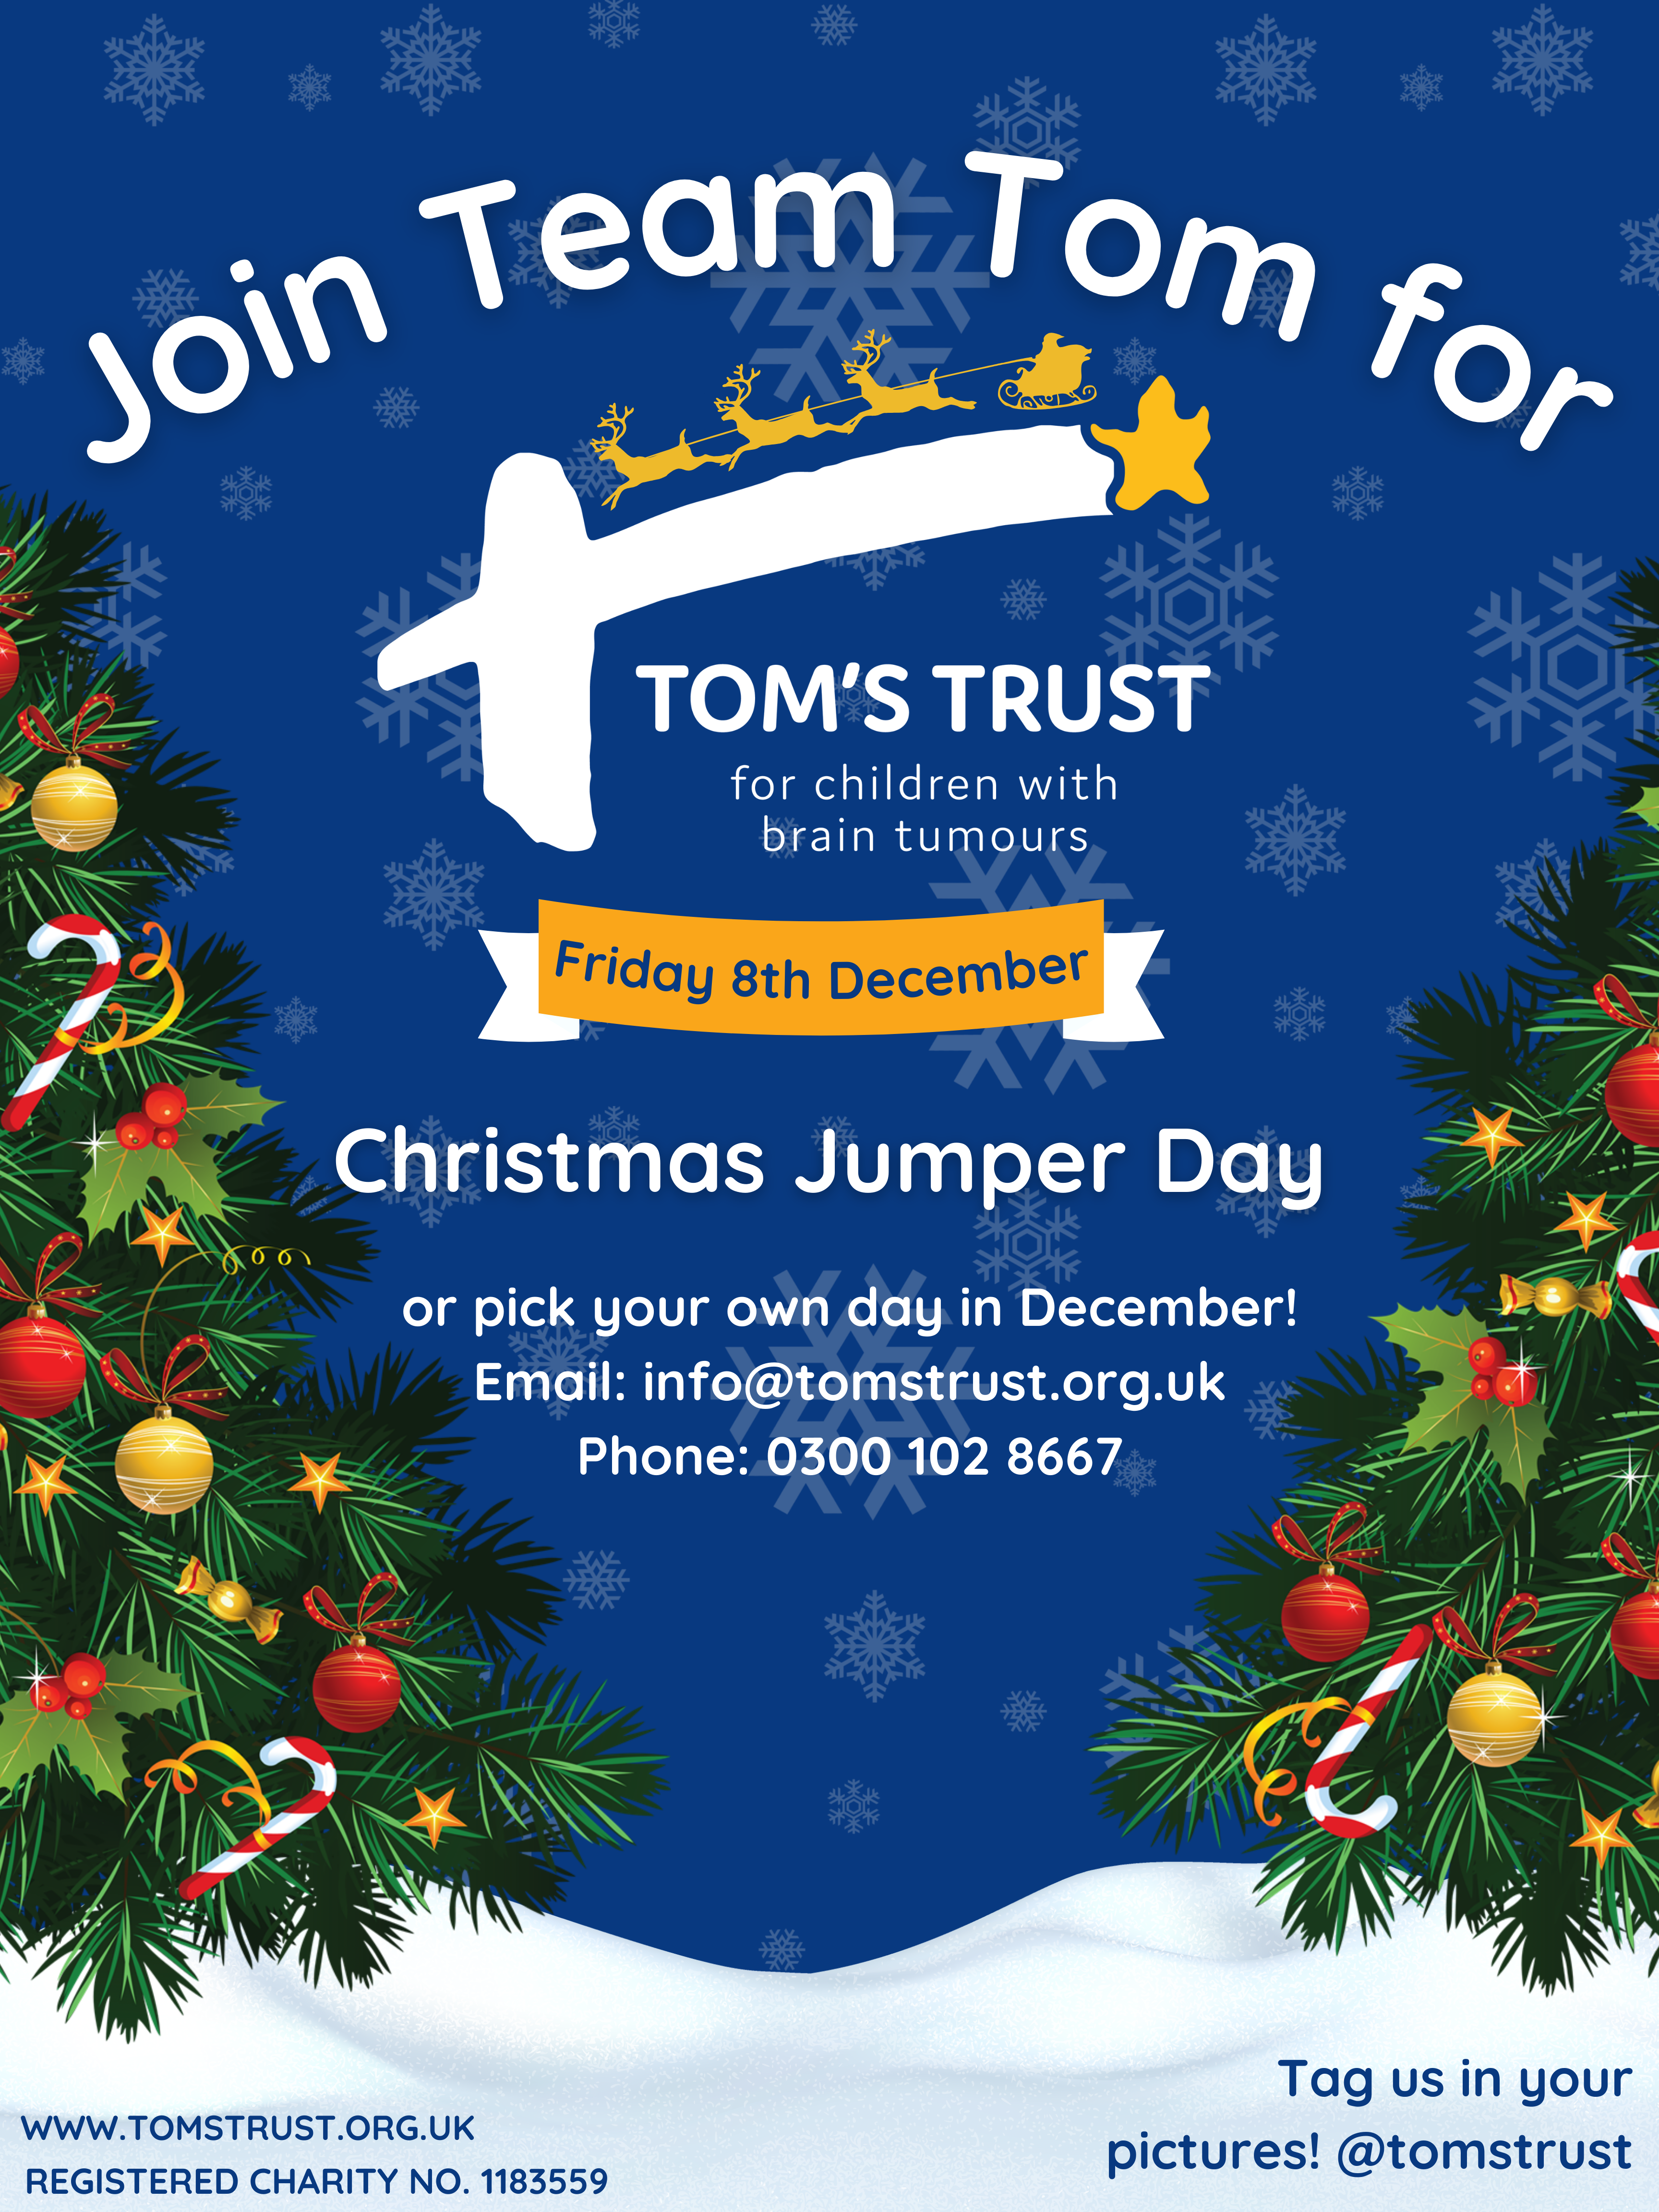 Christmas jumper day poster with trees, the Tom's Trust logo and messaging on it